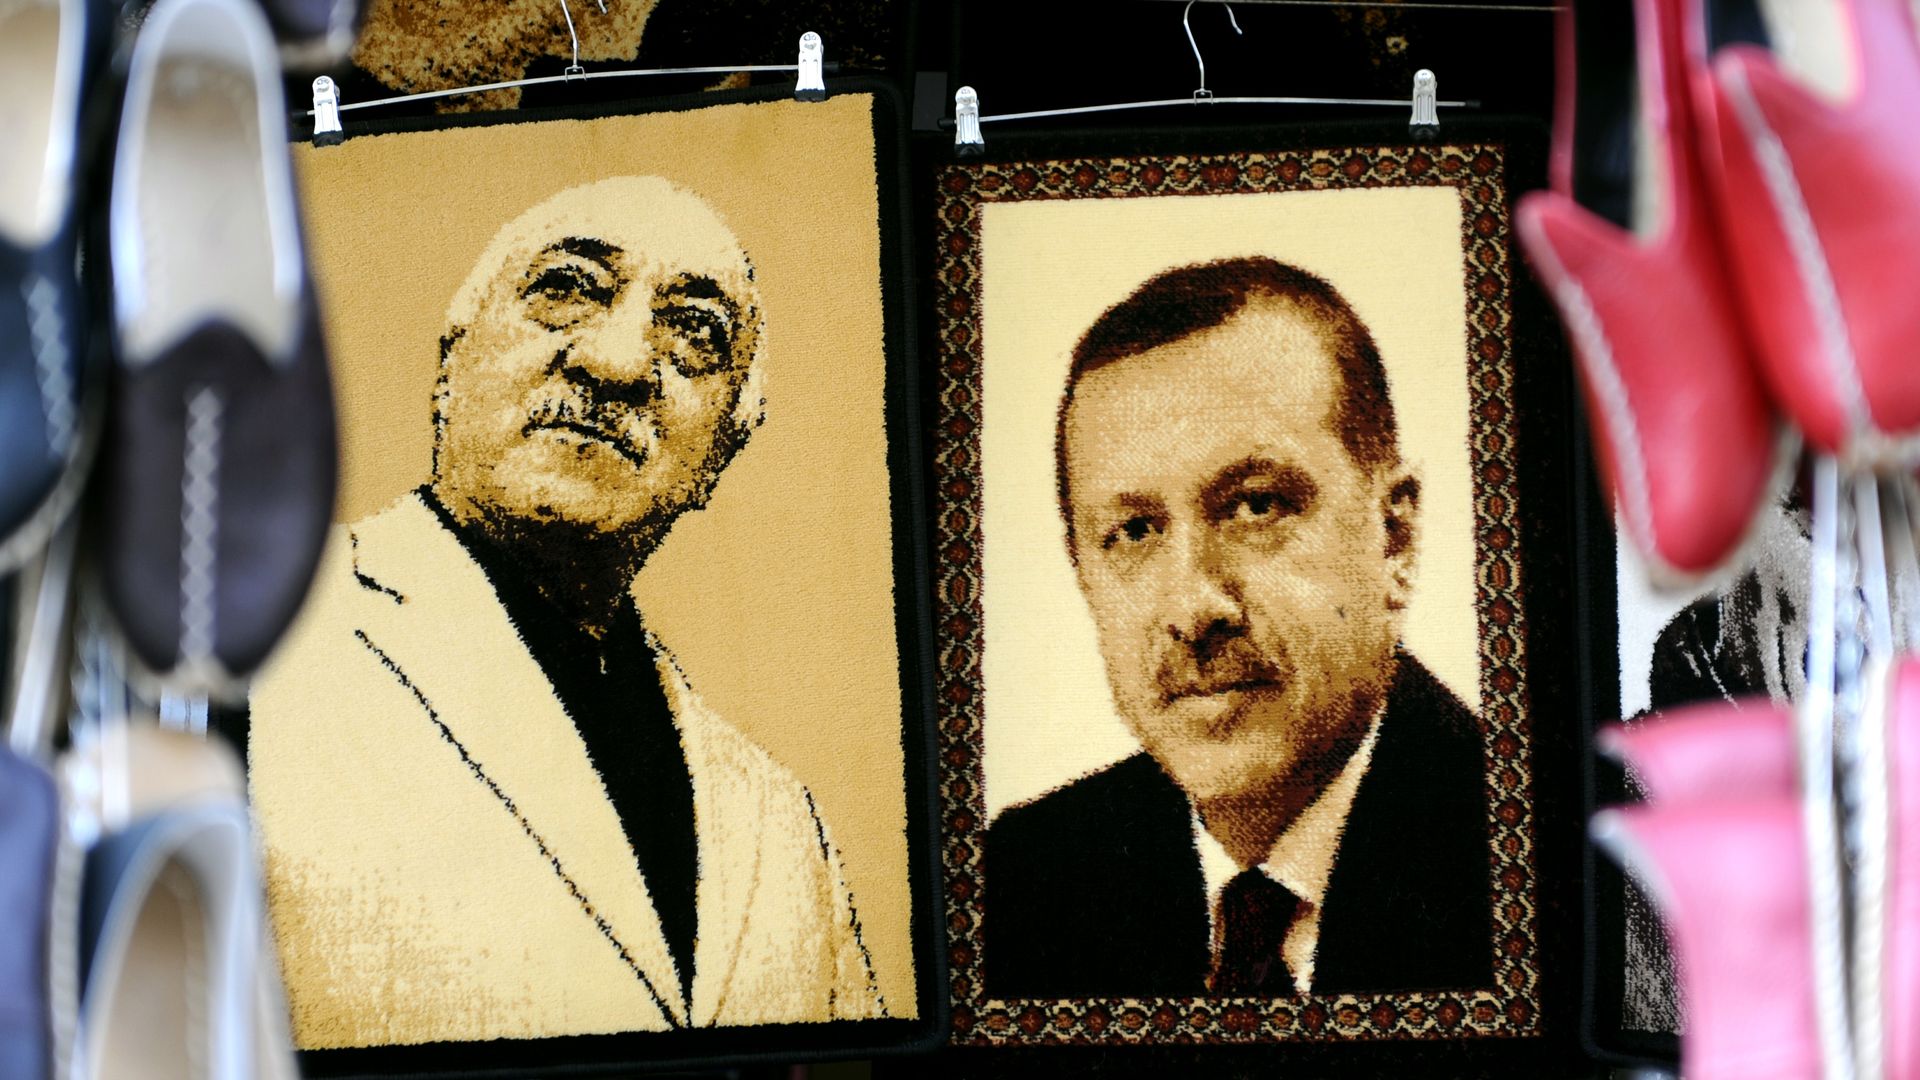 Embroidered images of Turkish cleric Fetullah Gulen (L) and President Recep Tayyip Erdogan (R)